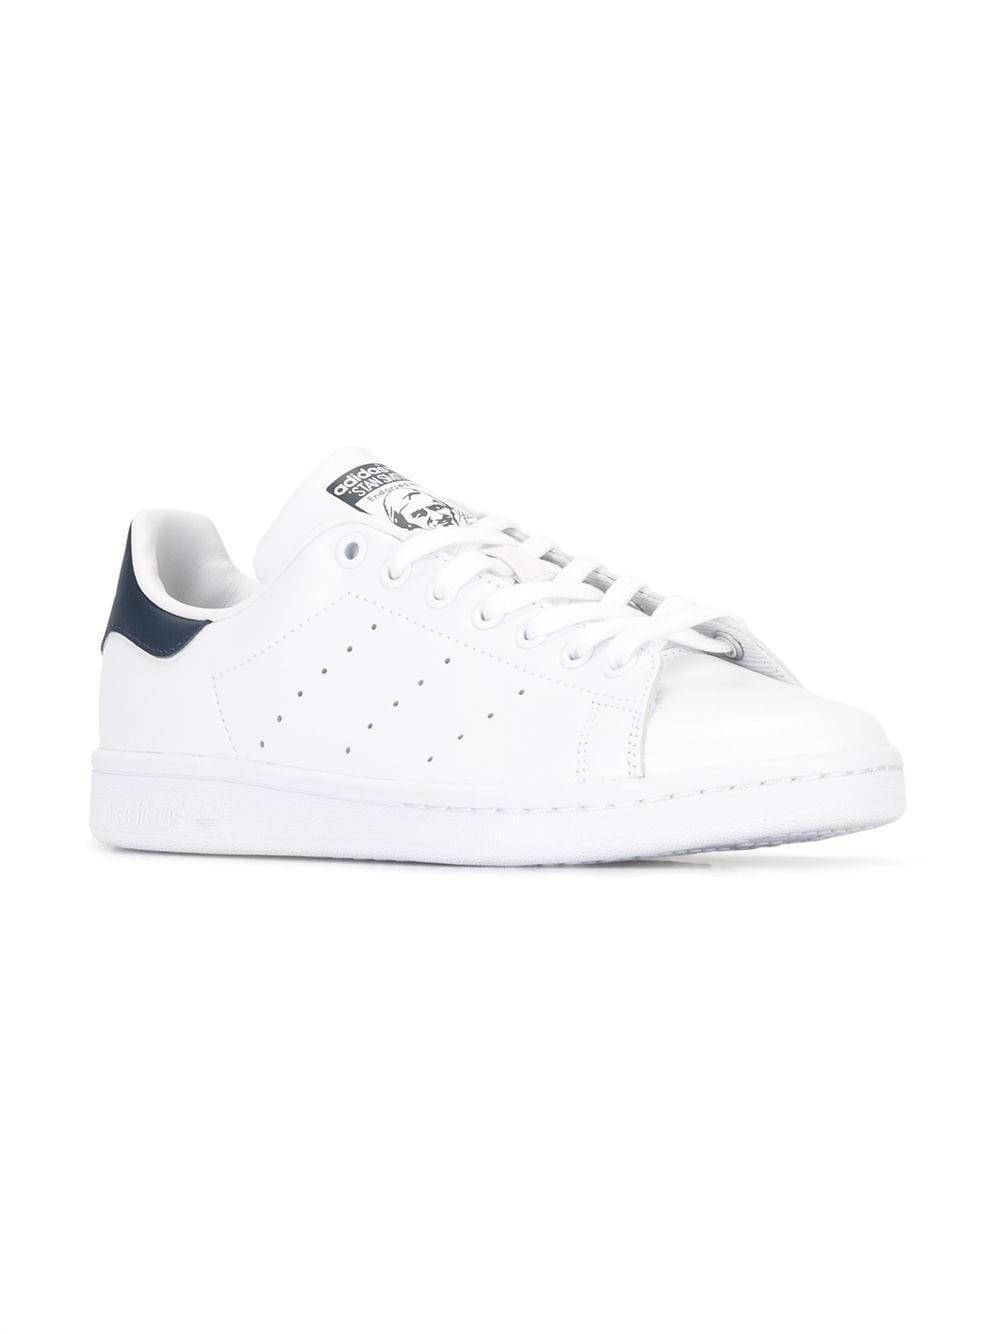 Shop adidas Stan Smith sneakers with Express Delivery - FARFETCH